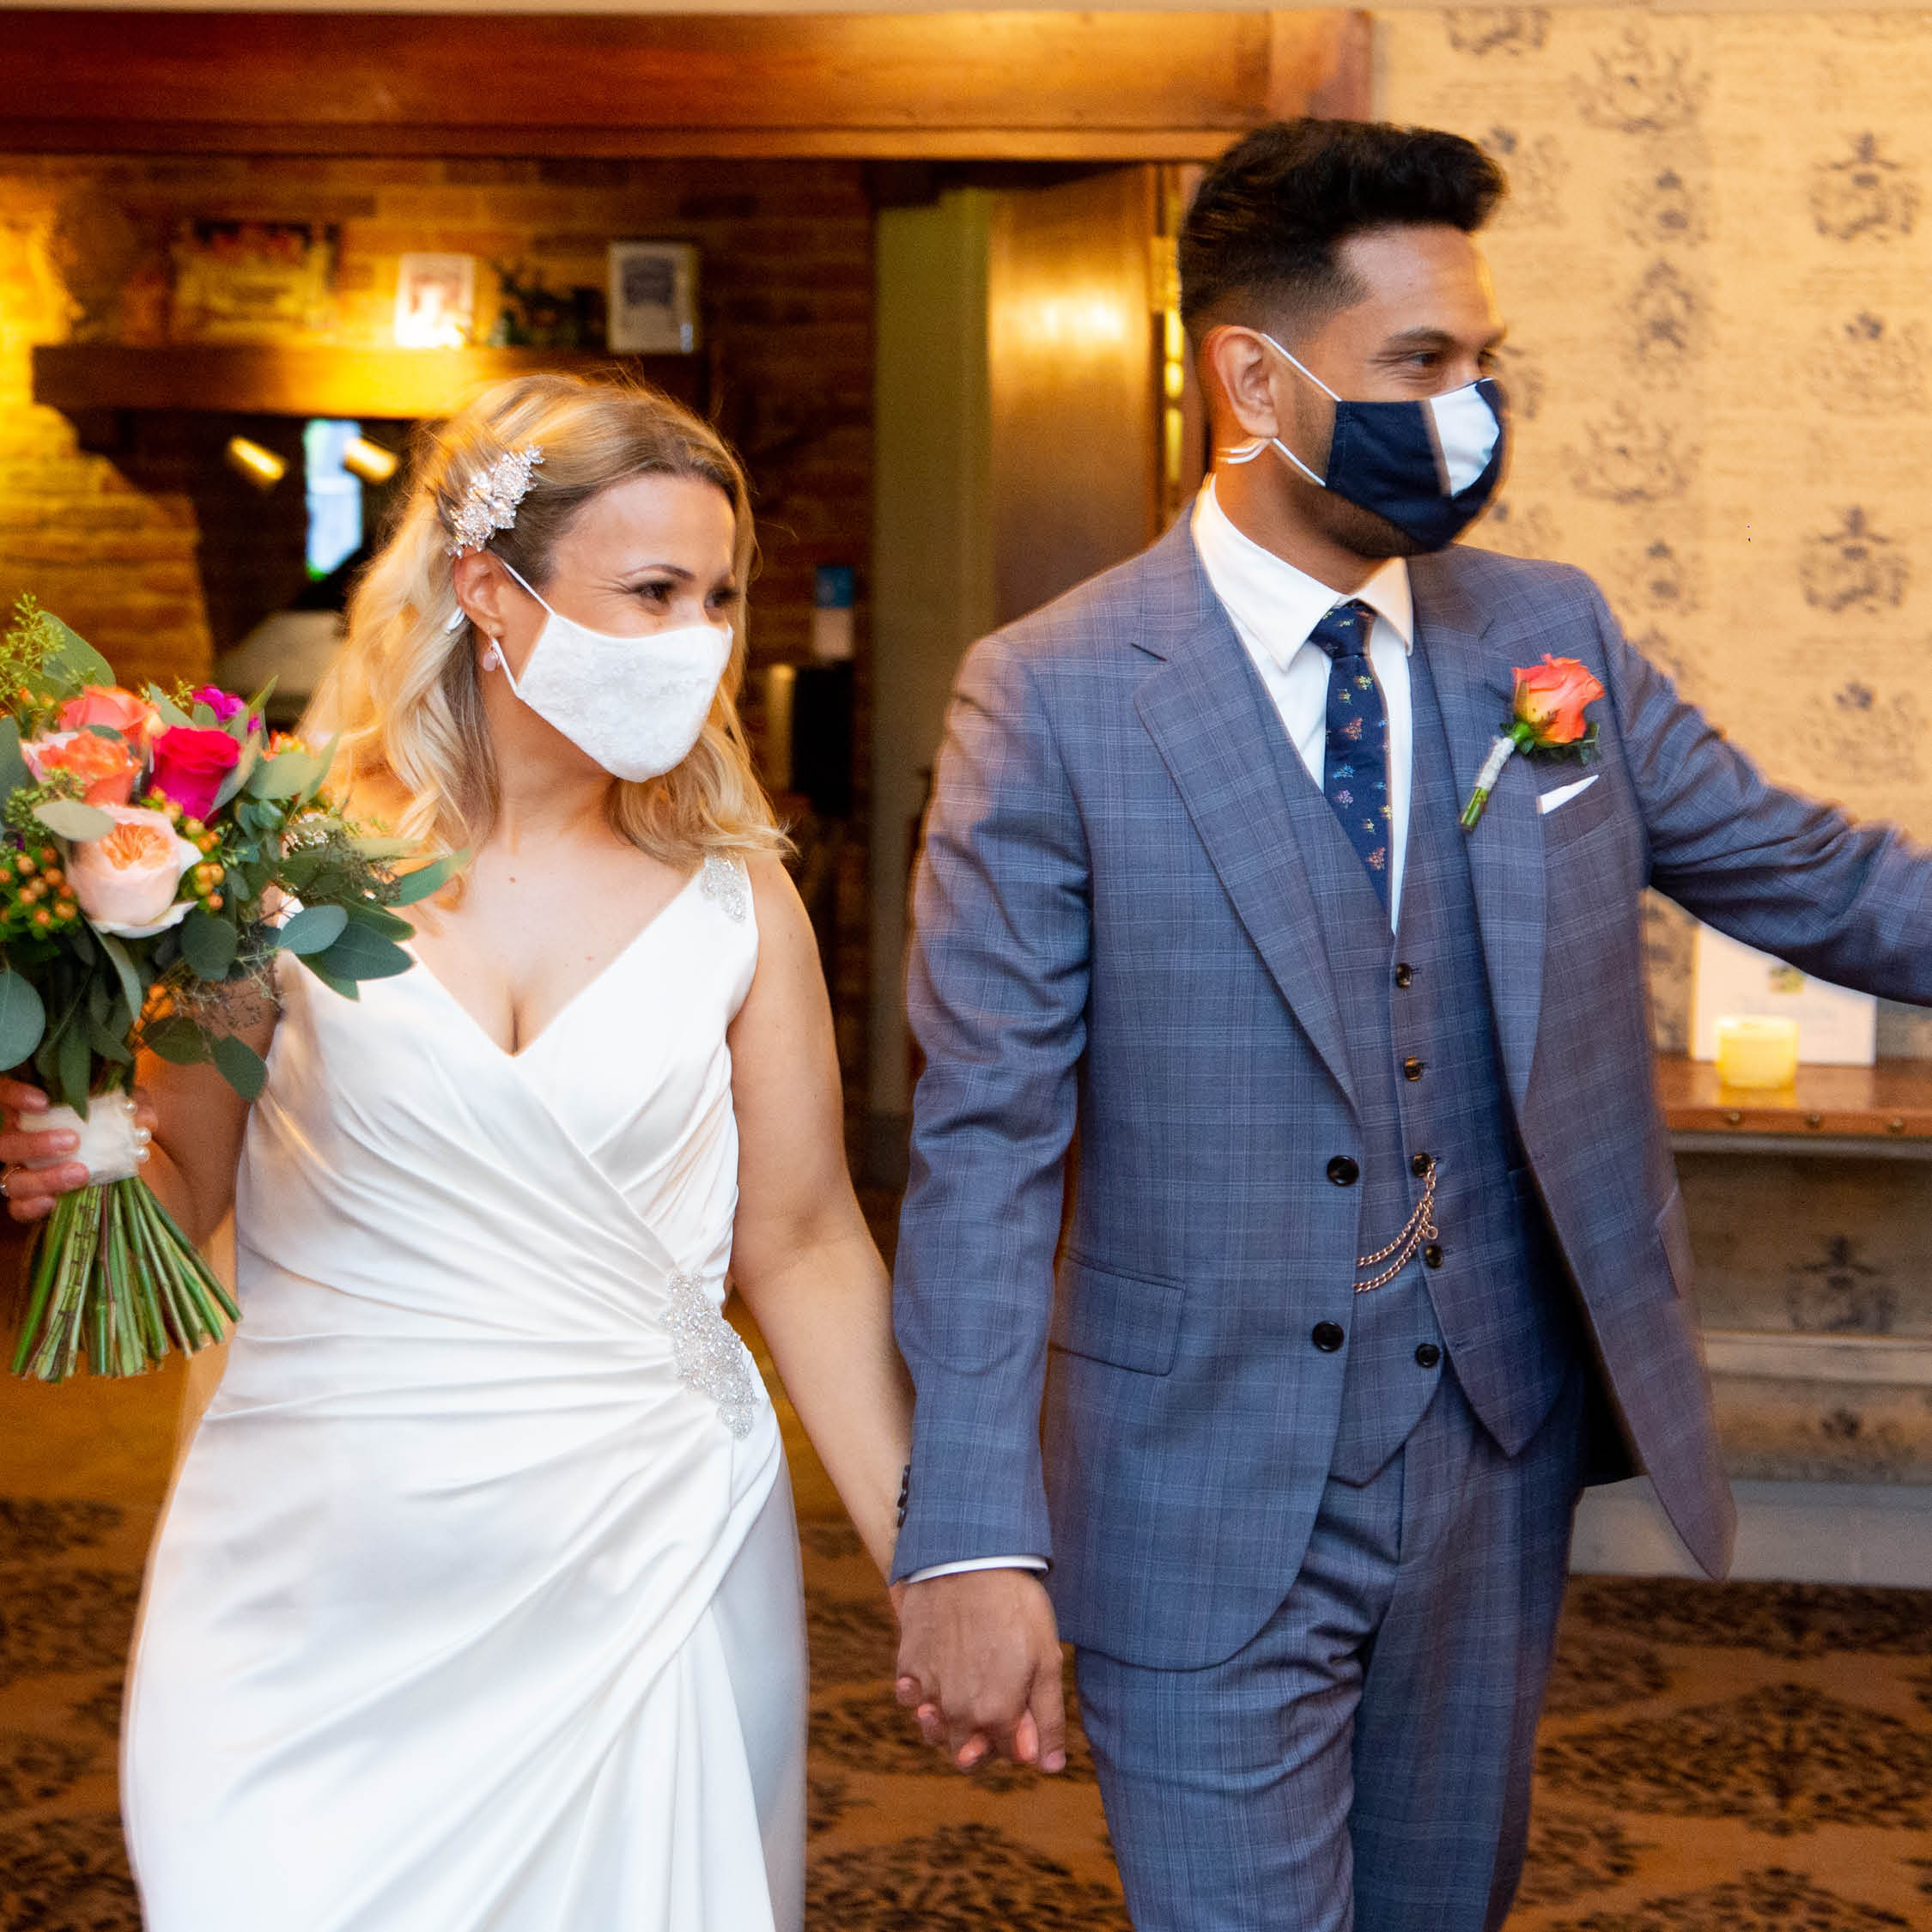 Things to Consider When Your Wedding Date is Affected by the Coronavirus, covid set up